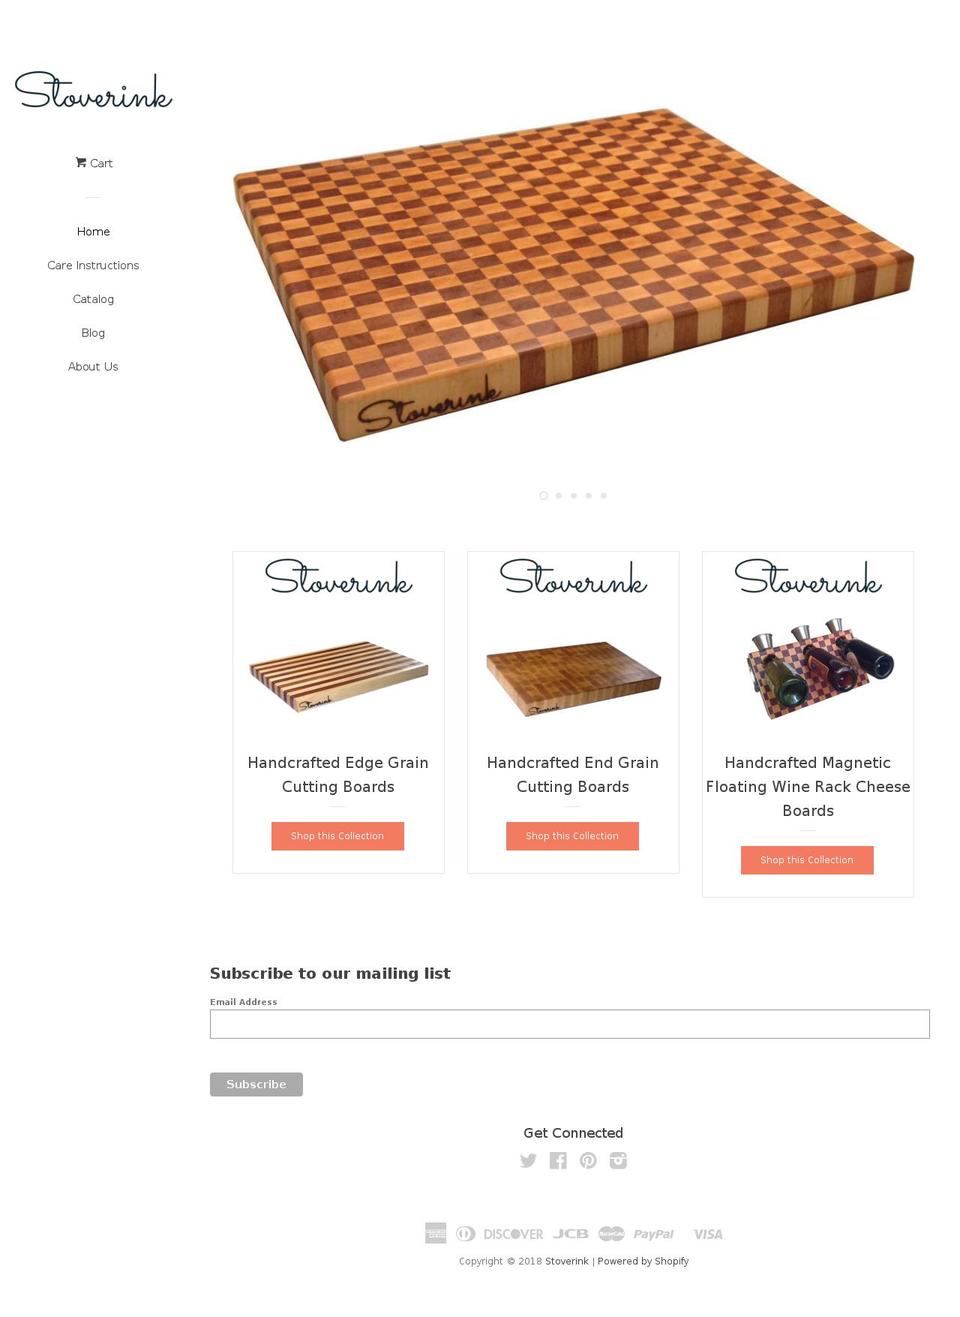 Express Shopify theme site example stoverink.com